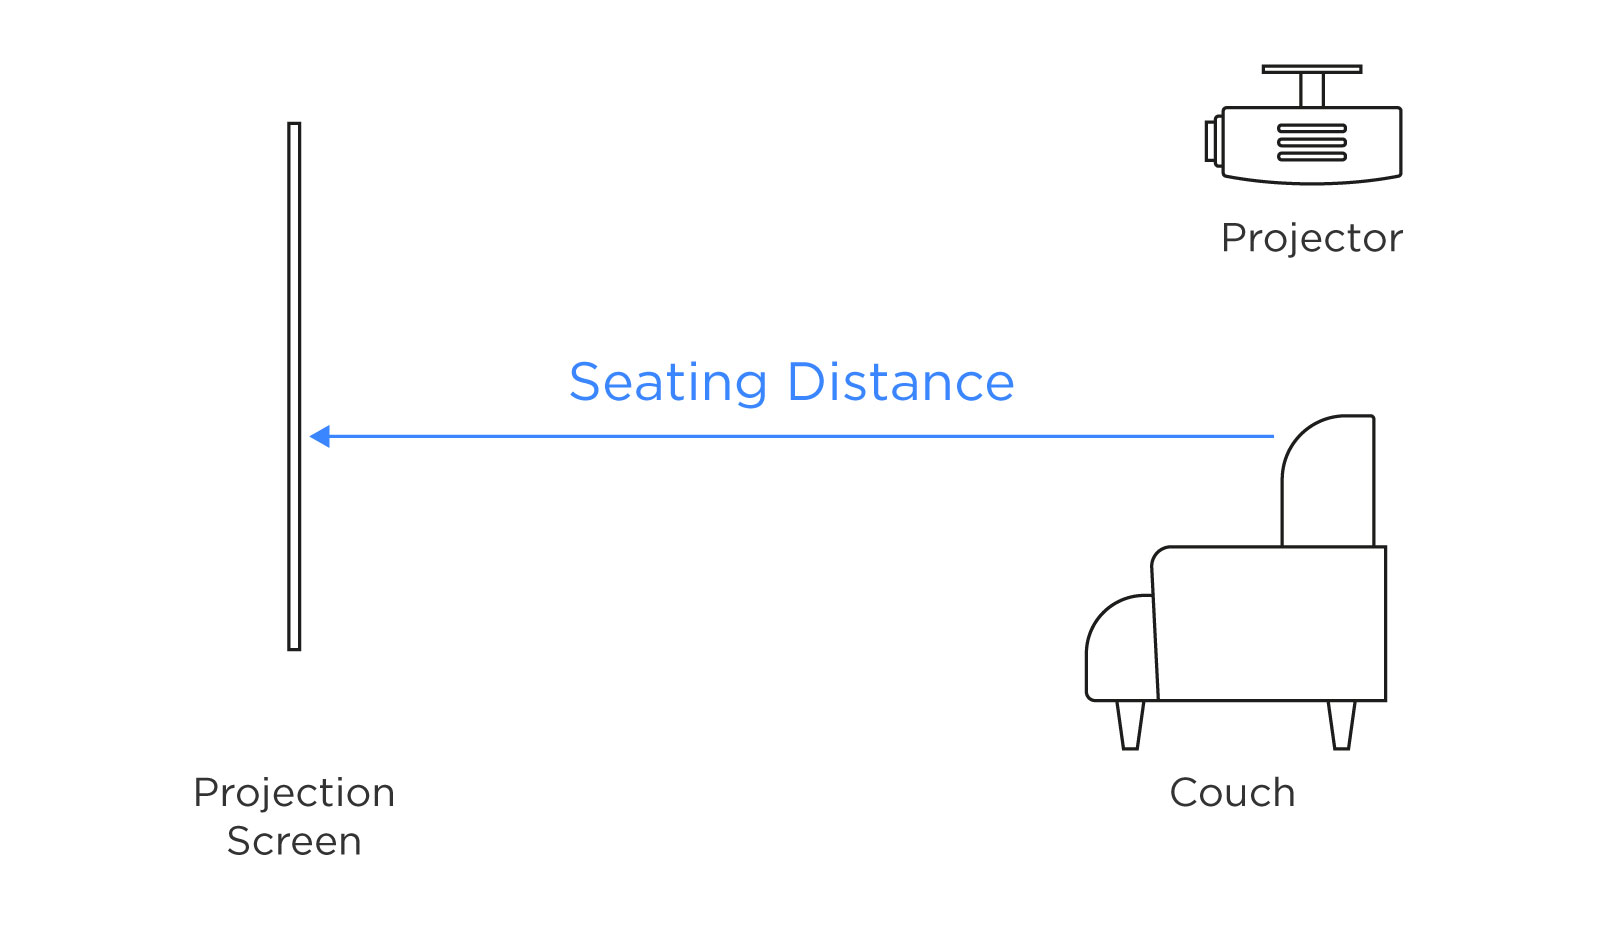 Seating Distance